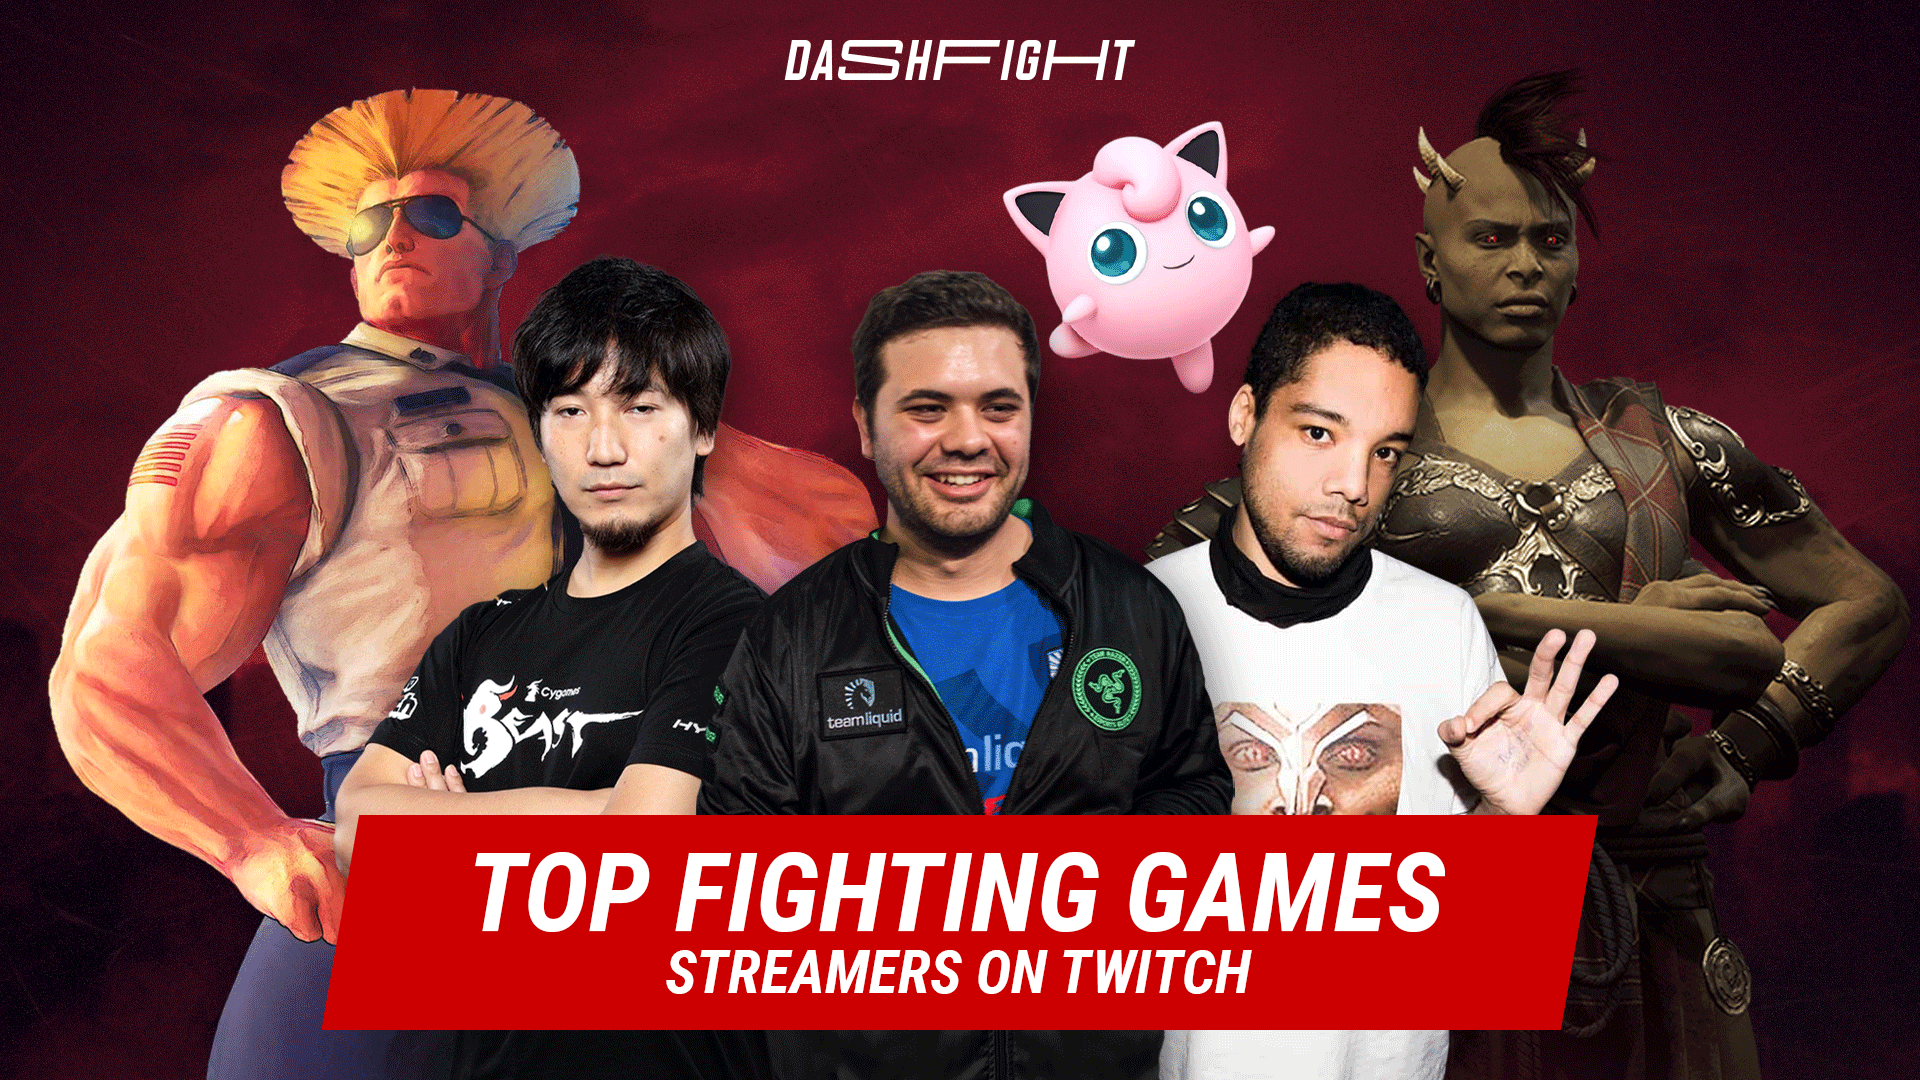 Fighting Streams: The Most Popular Games and Influencers